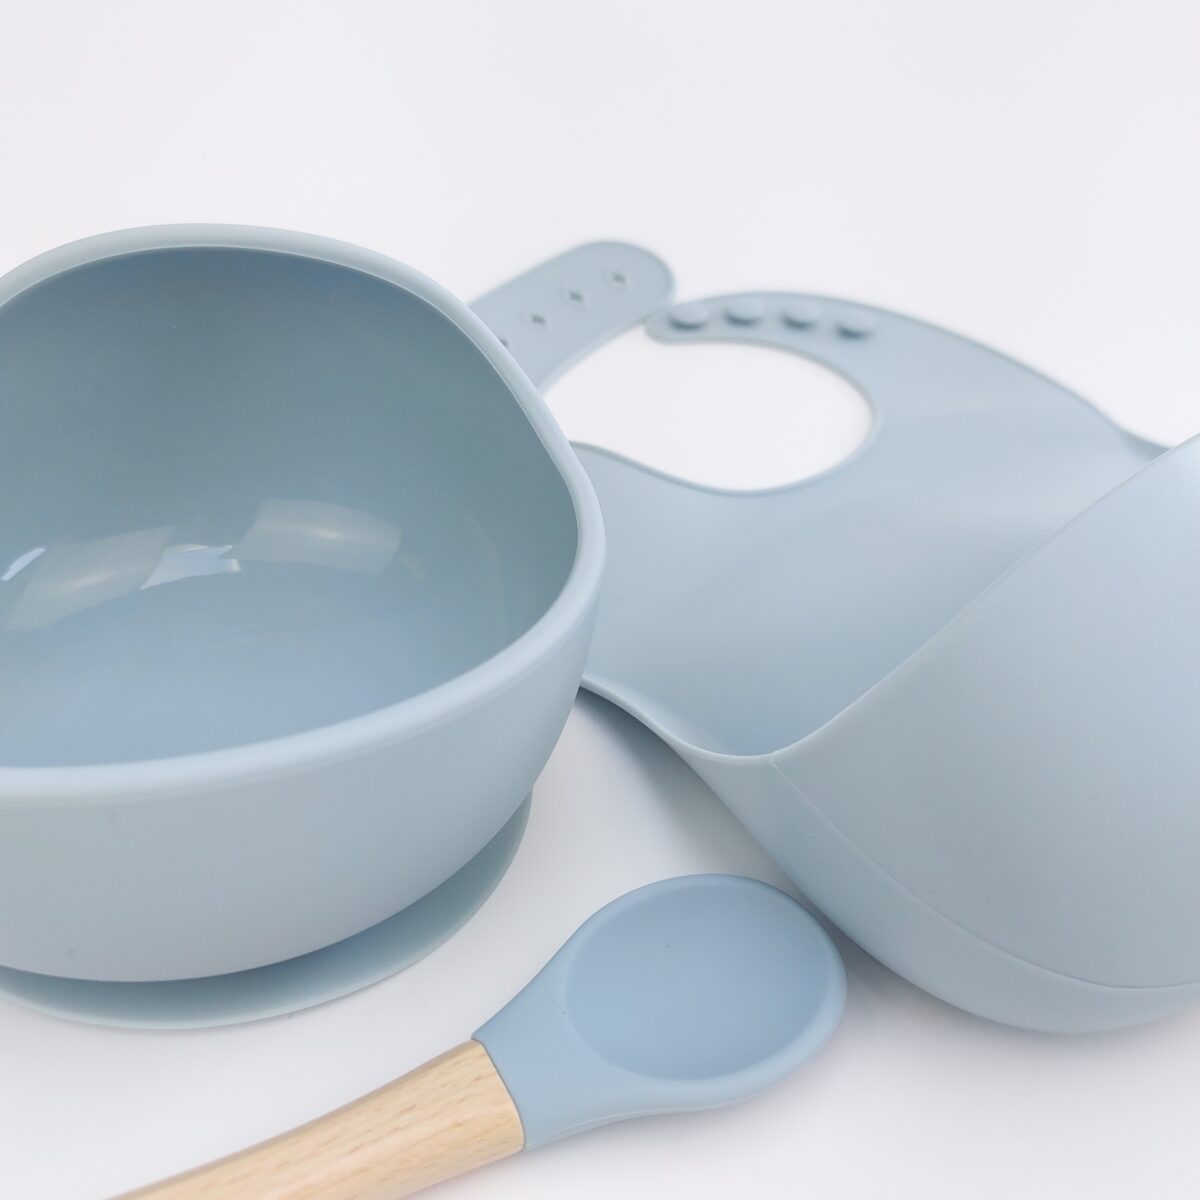 weaning set, baby feeding set, silicone weaning set, suction bowl with bib and spoon